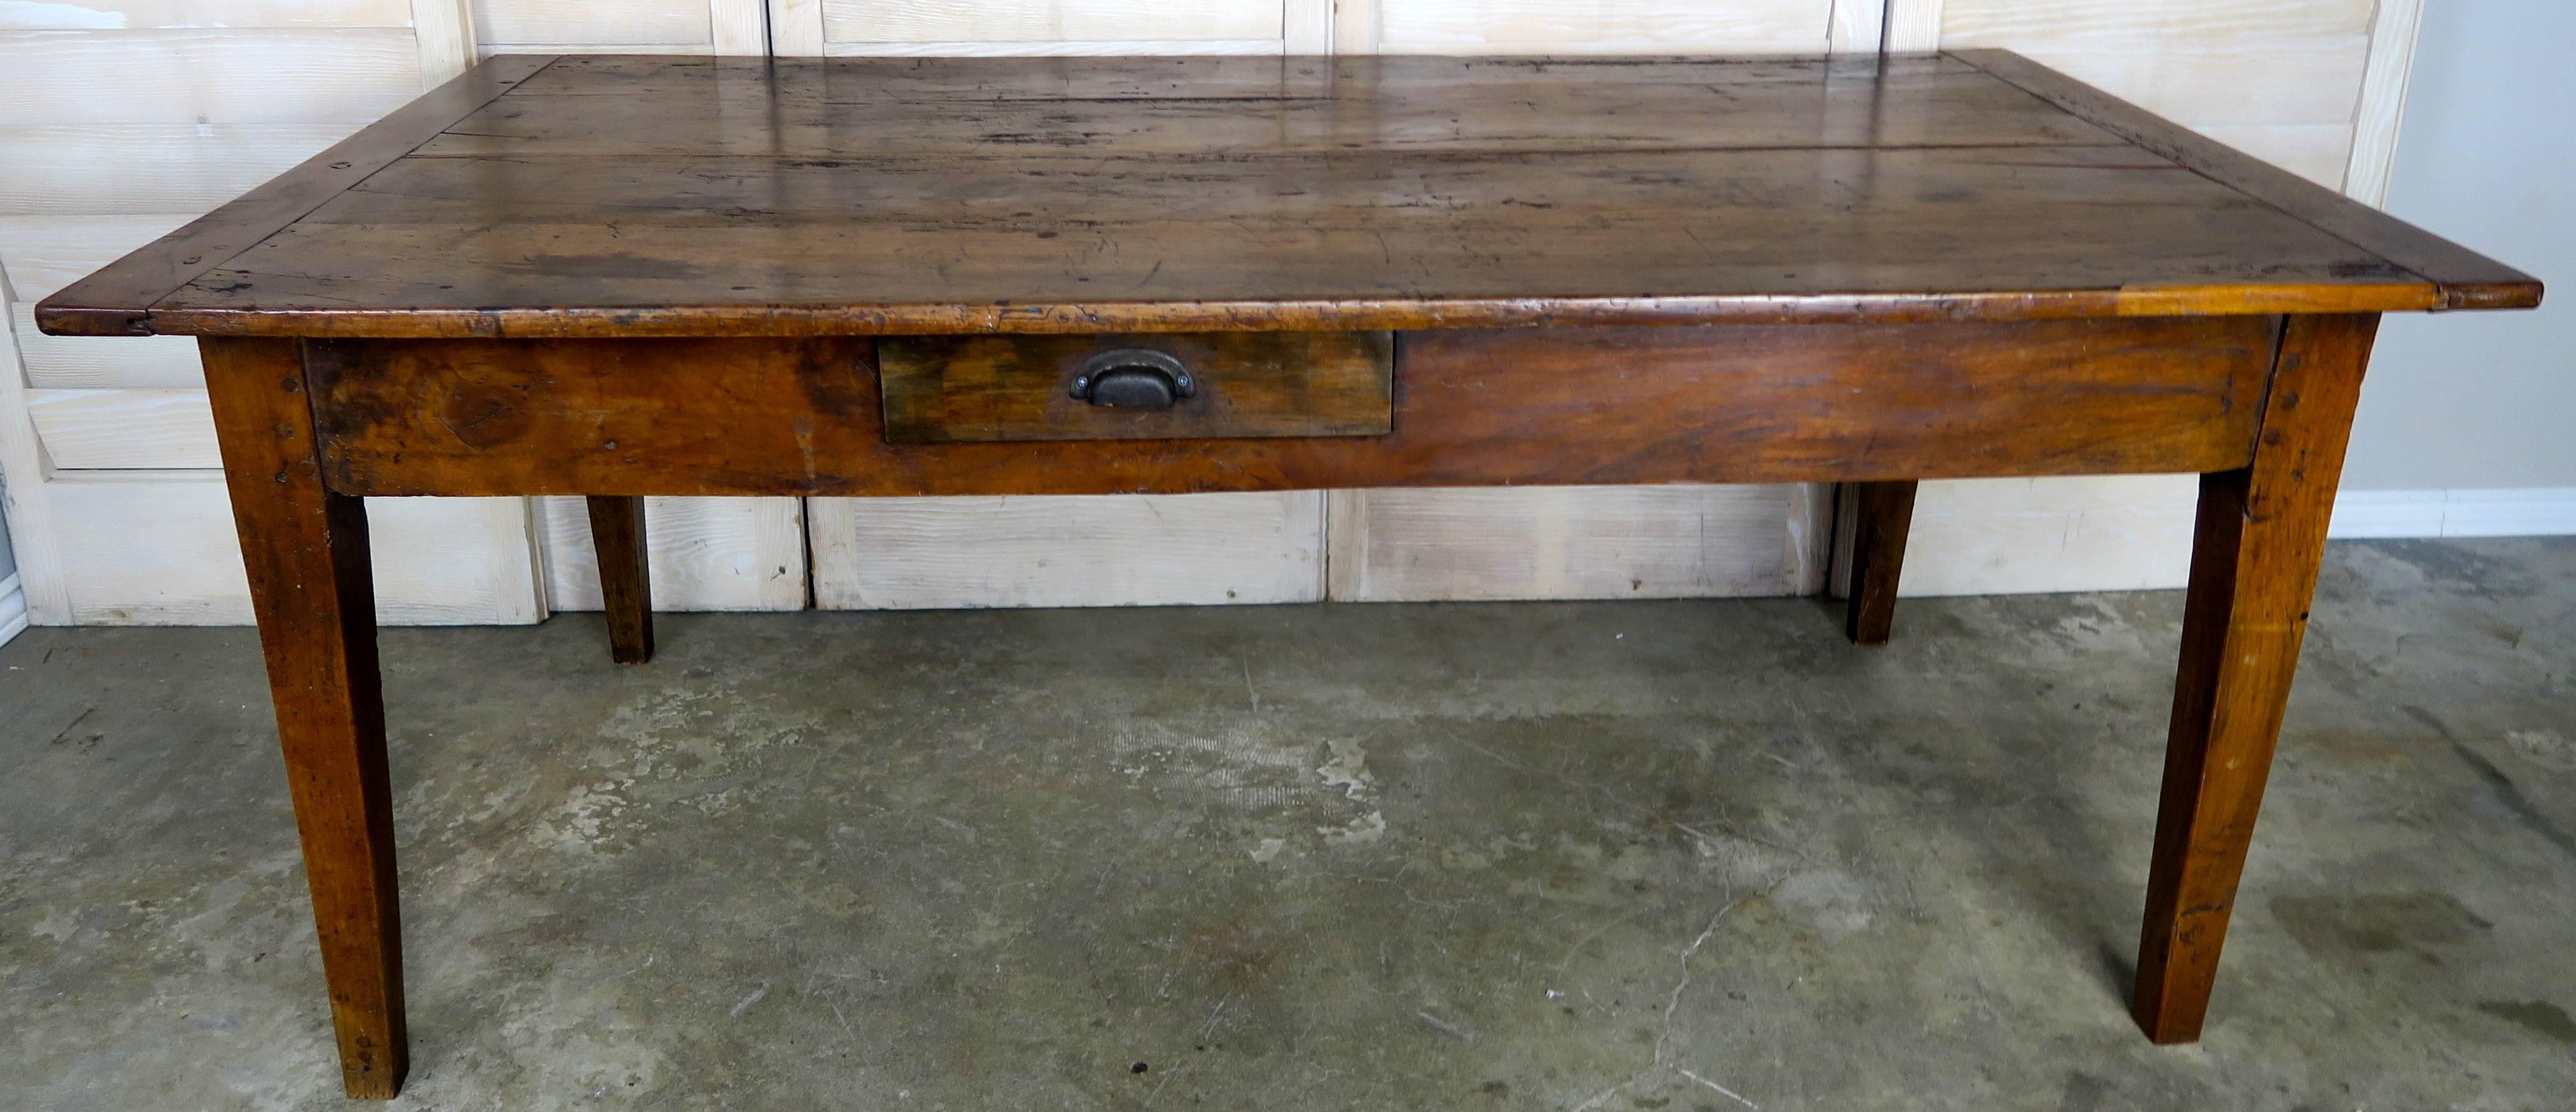 19th century cheerywood dining table that was reduced to a coffee table height. The table stands on four tapered legs and has a single drawer.